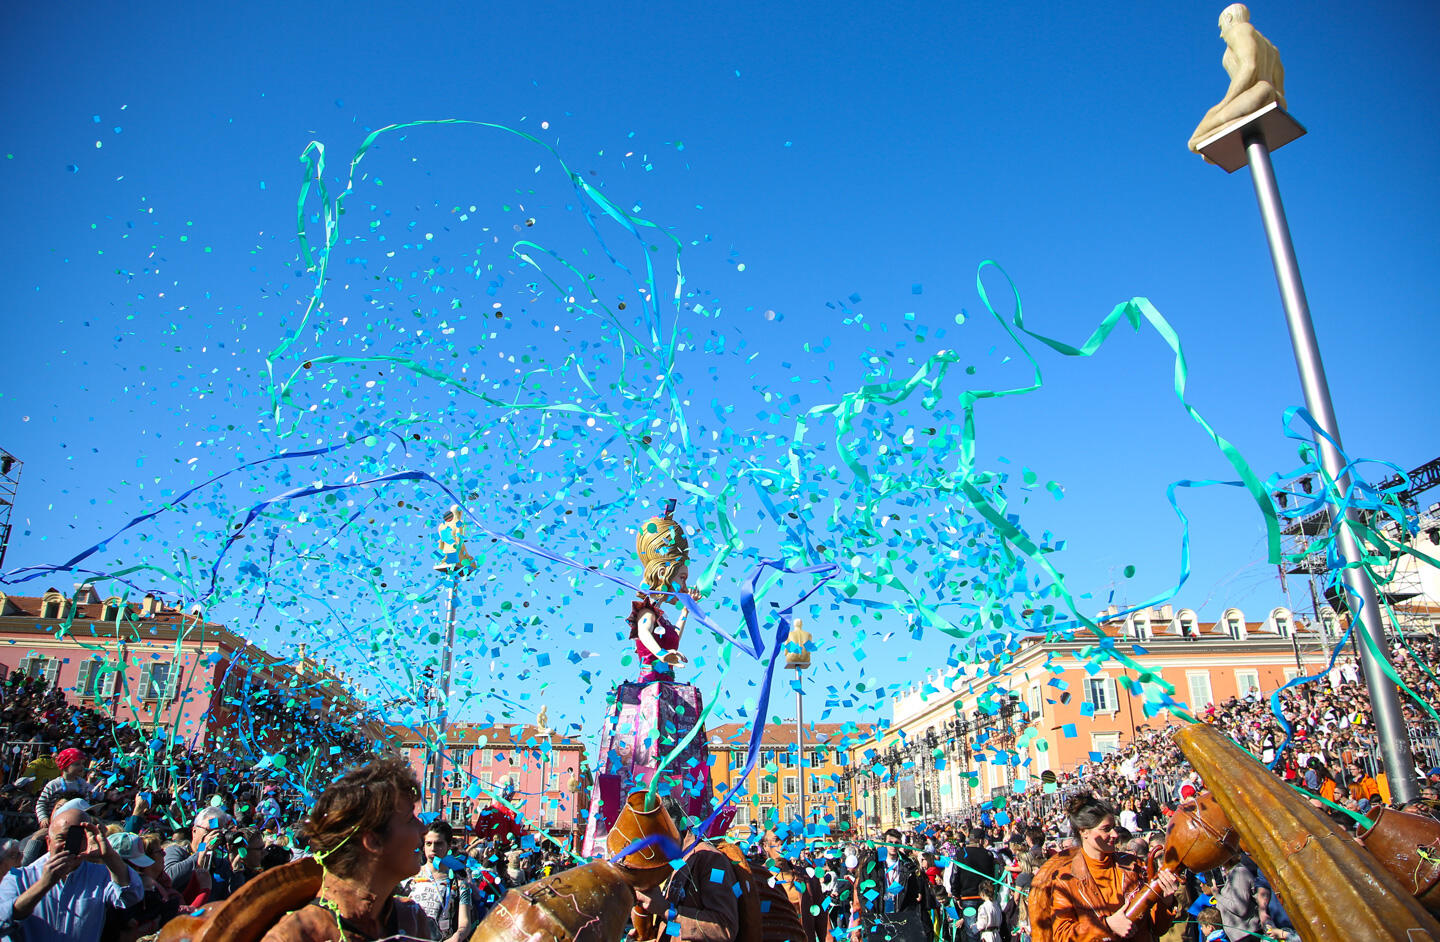 Lively celebration of the Nice Carnival with turquoise confetti flying in the air, enthusiastic crowd and colorful carnival sculptures under the blue sky.